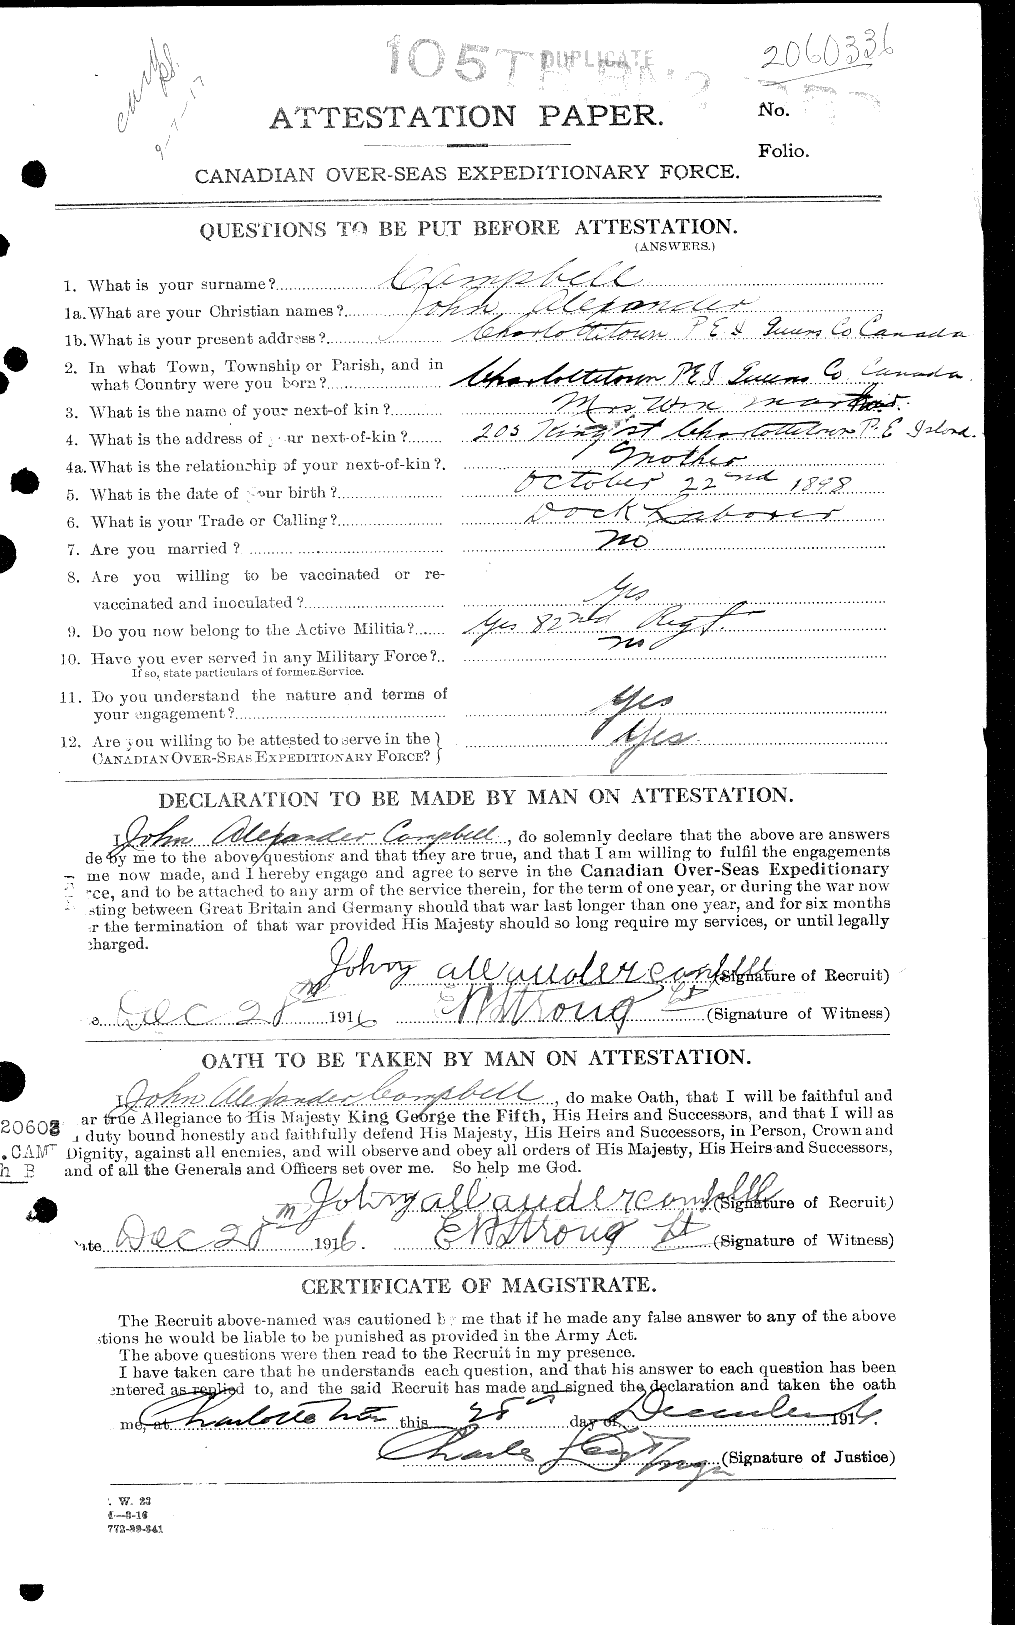 Personnel Records of the First World War - CEF 006862a